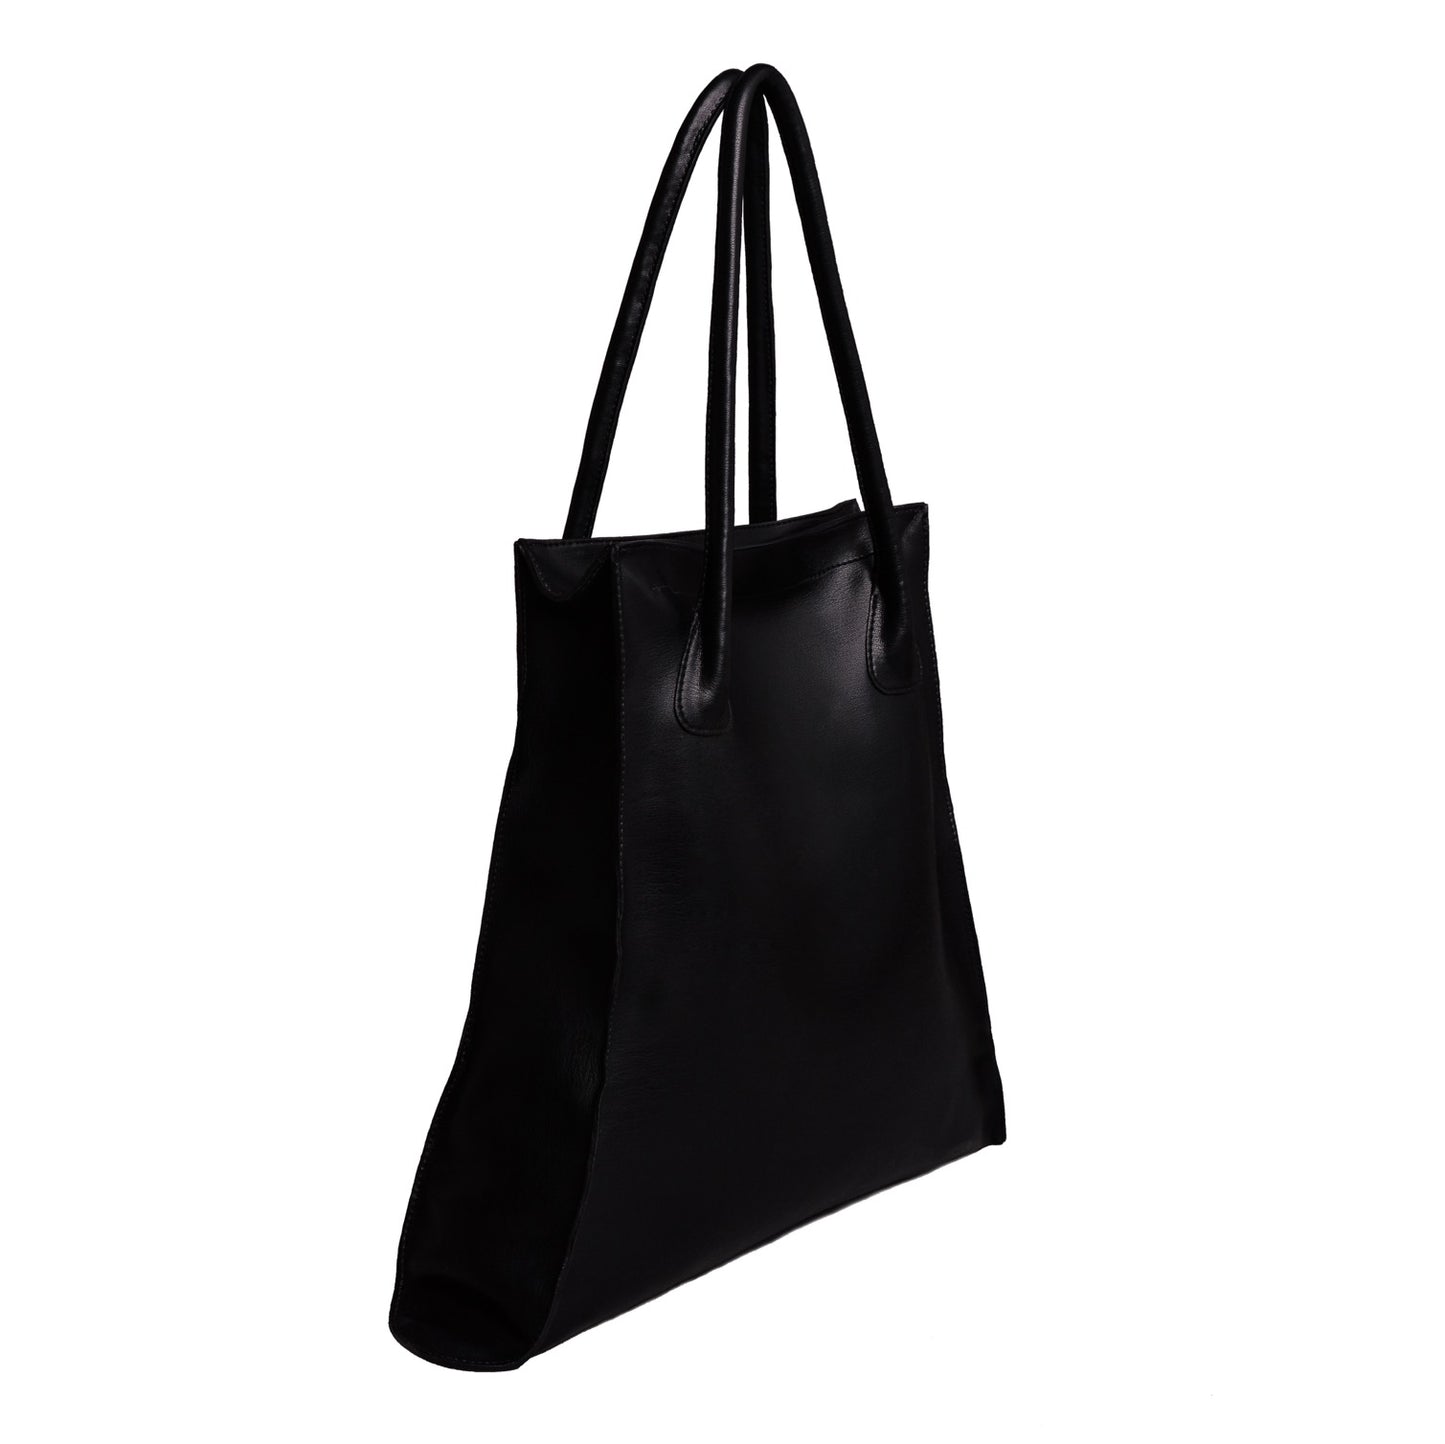 Bags, Luxury, Eco-friendly, Sustainable, Recycled, Vegan, Tote bag, made in Italy, Handmade